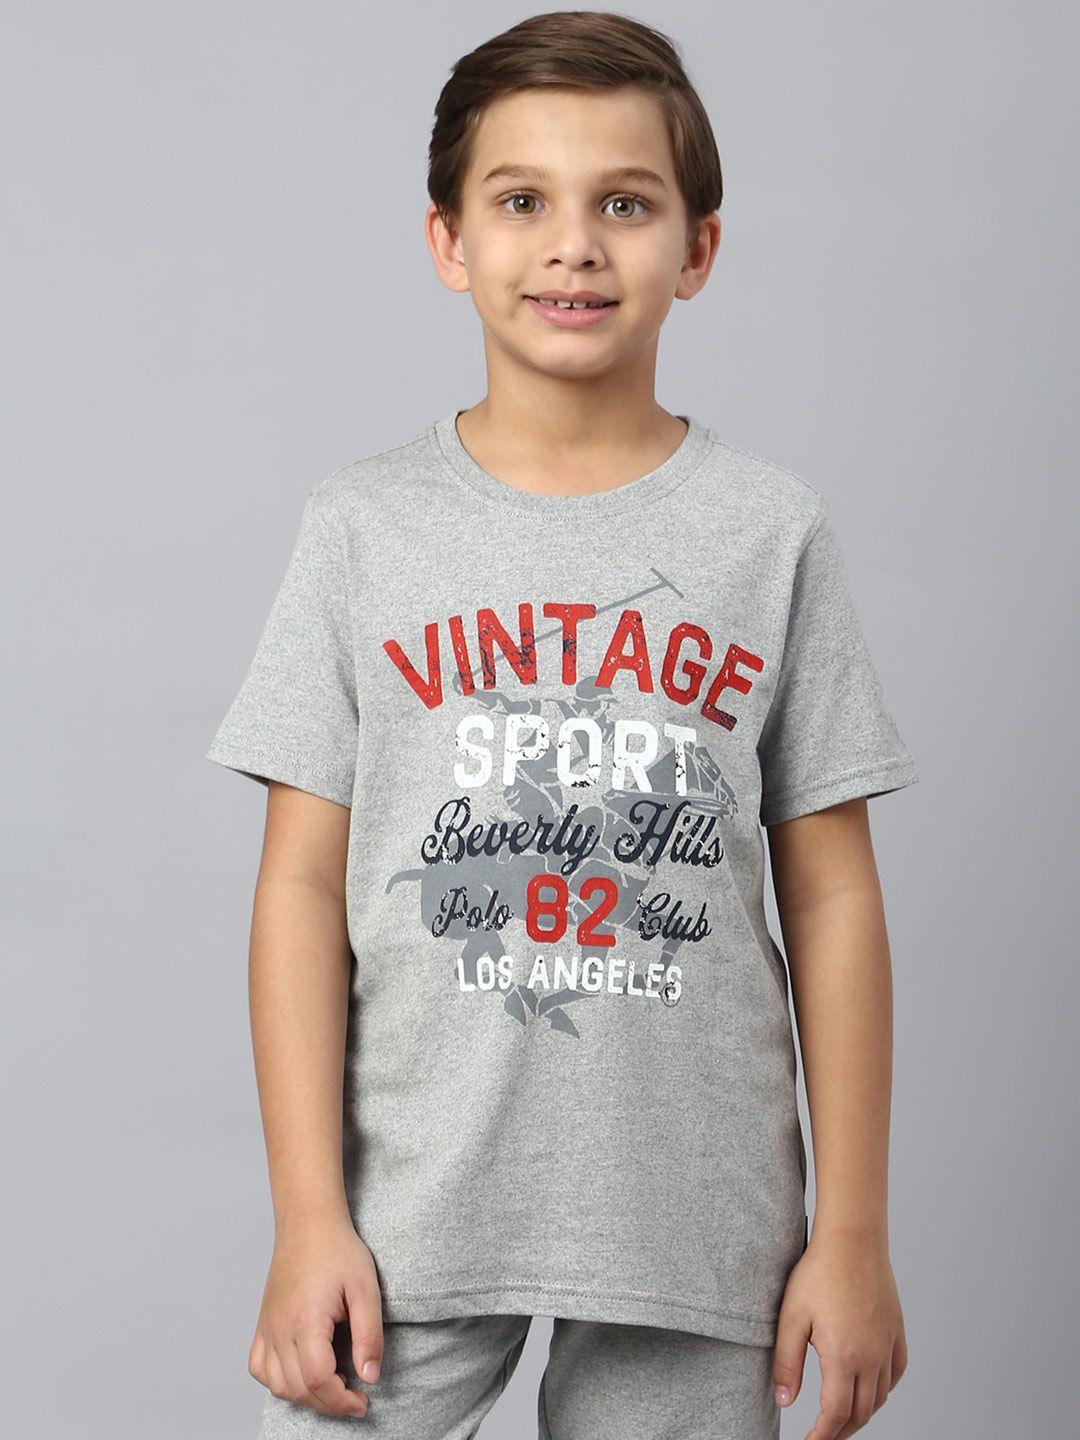 beverly hills polo club boys typography printed round neck cotton t-shirt